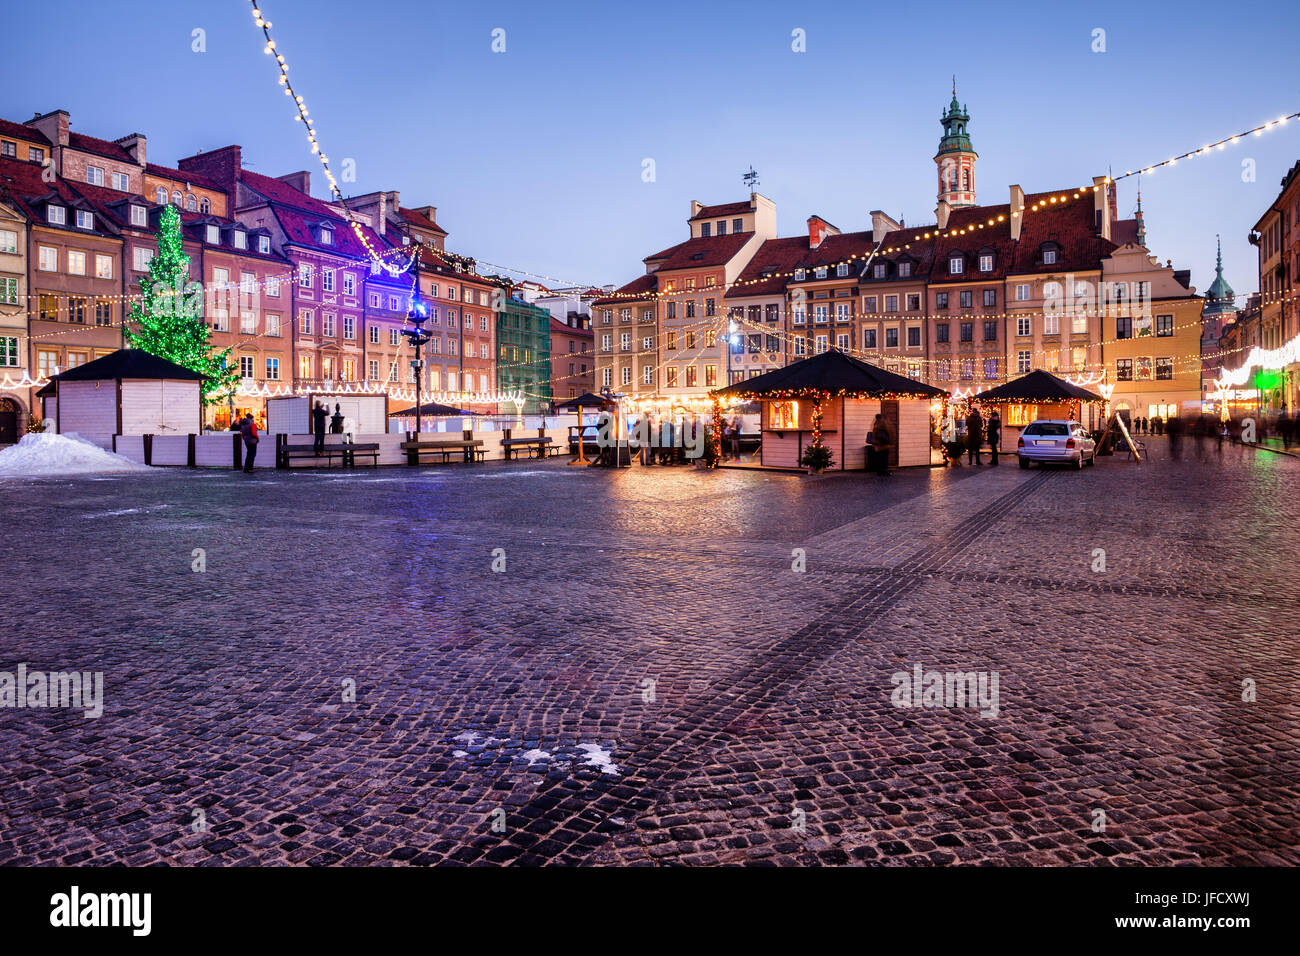 Evening at Old Town Market Square in Warsaw, capital city of Poland Stock Photo